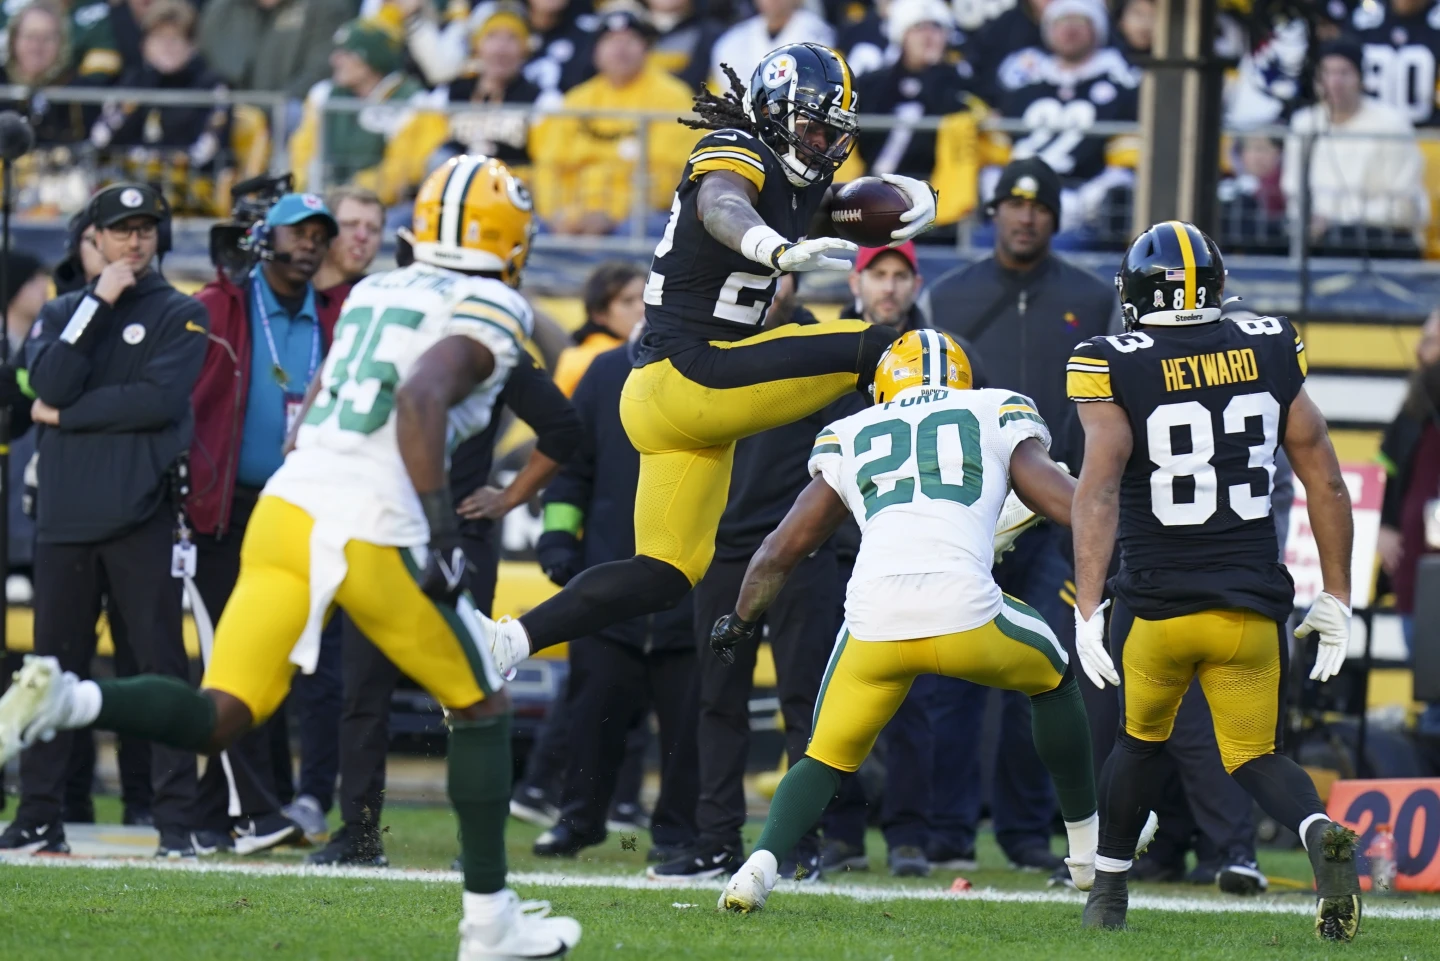 After making recent strides, Packers run defense takes big step backward in loss to Steelers